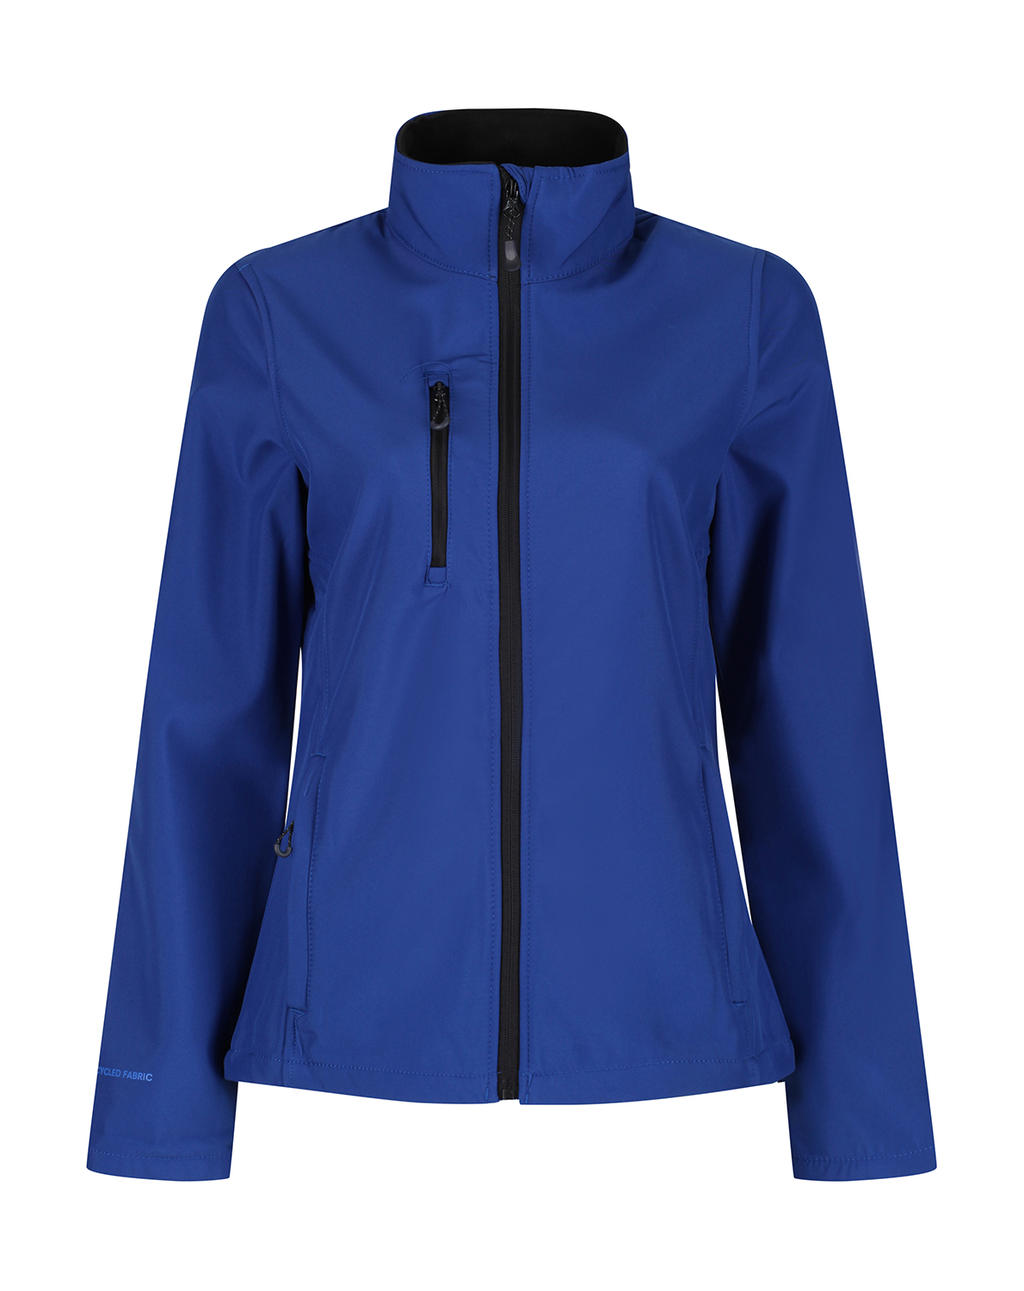  Womens Honestly Made Recycled Softshell Jacket in Farbe New Royal